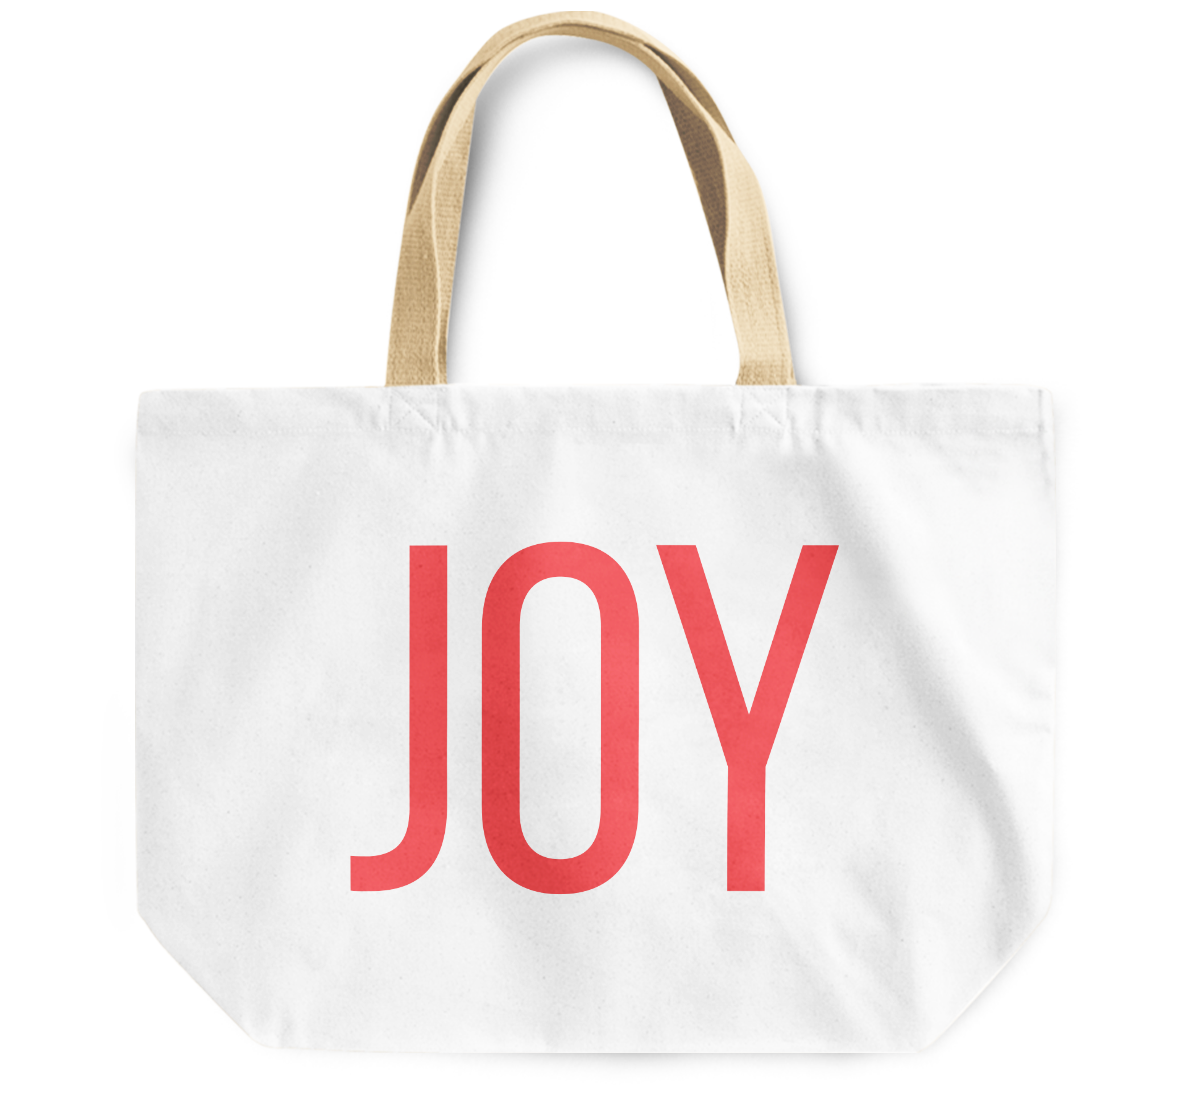 Tote Bag JOY Hand Carry Reusable Sturdy Canvas Grocery Shopping Bag Shoulder Bag - Totes, Duffle ...